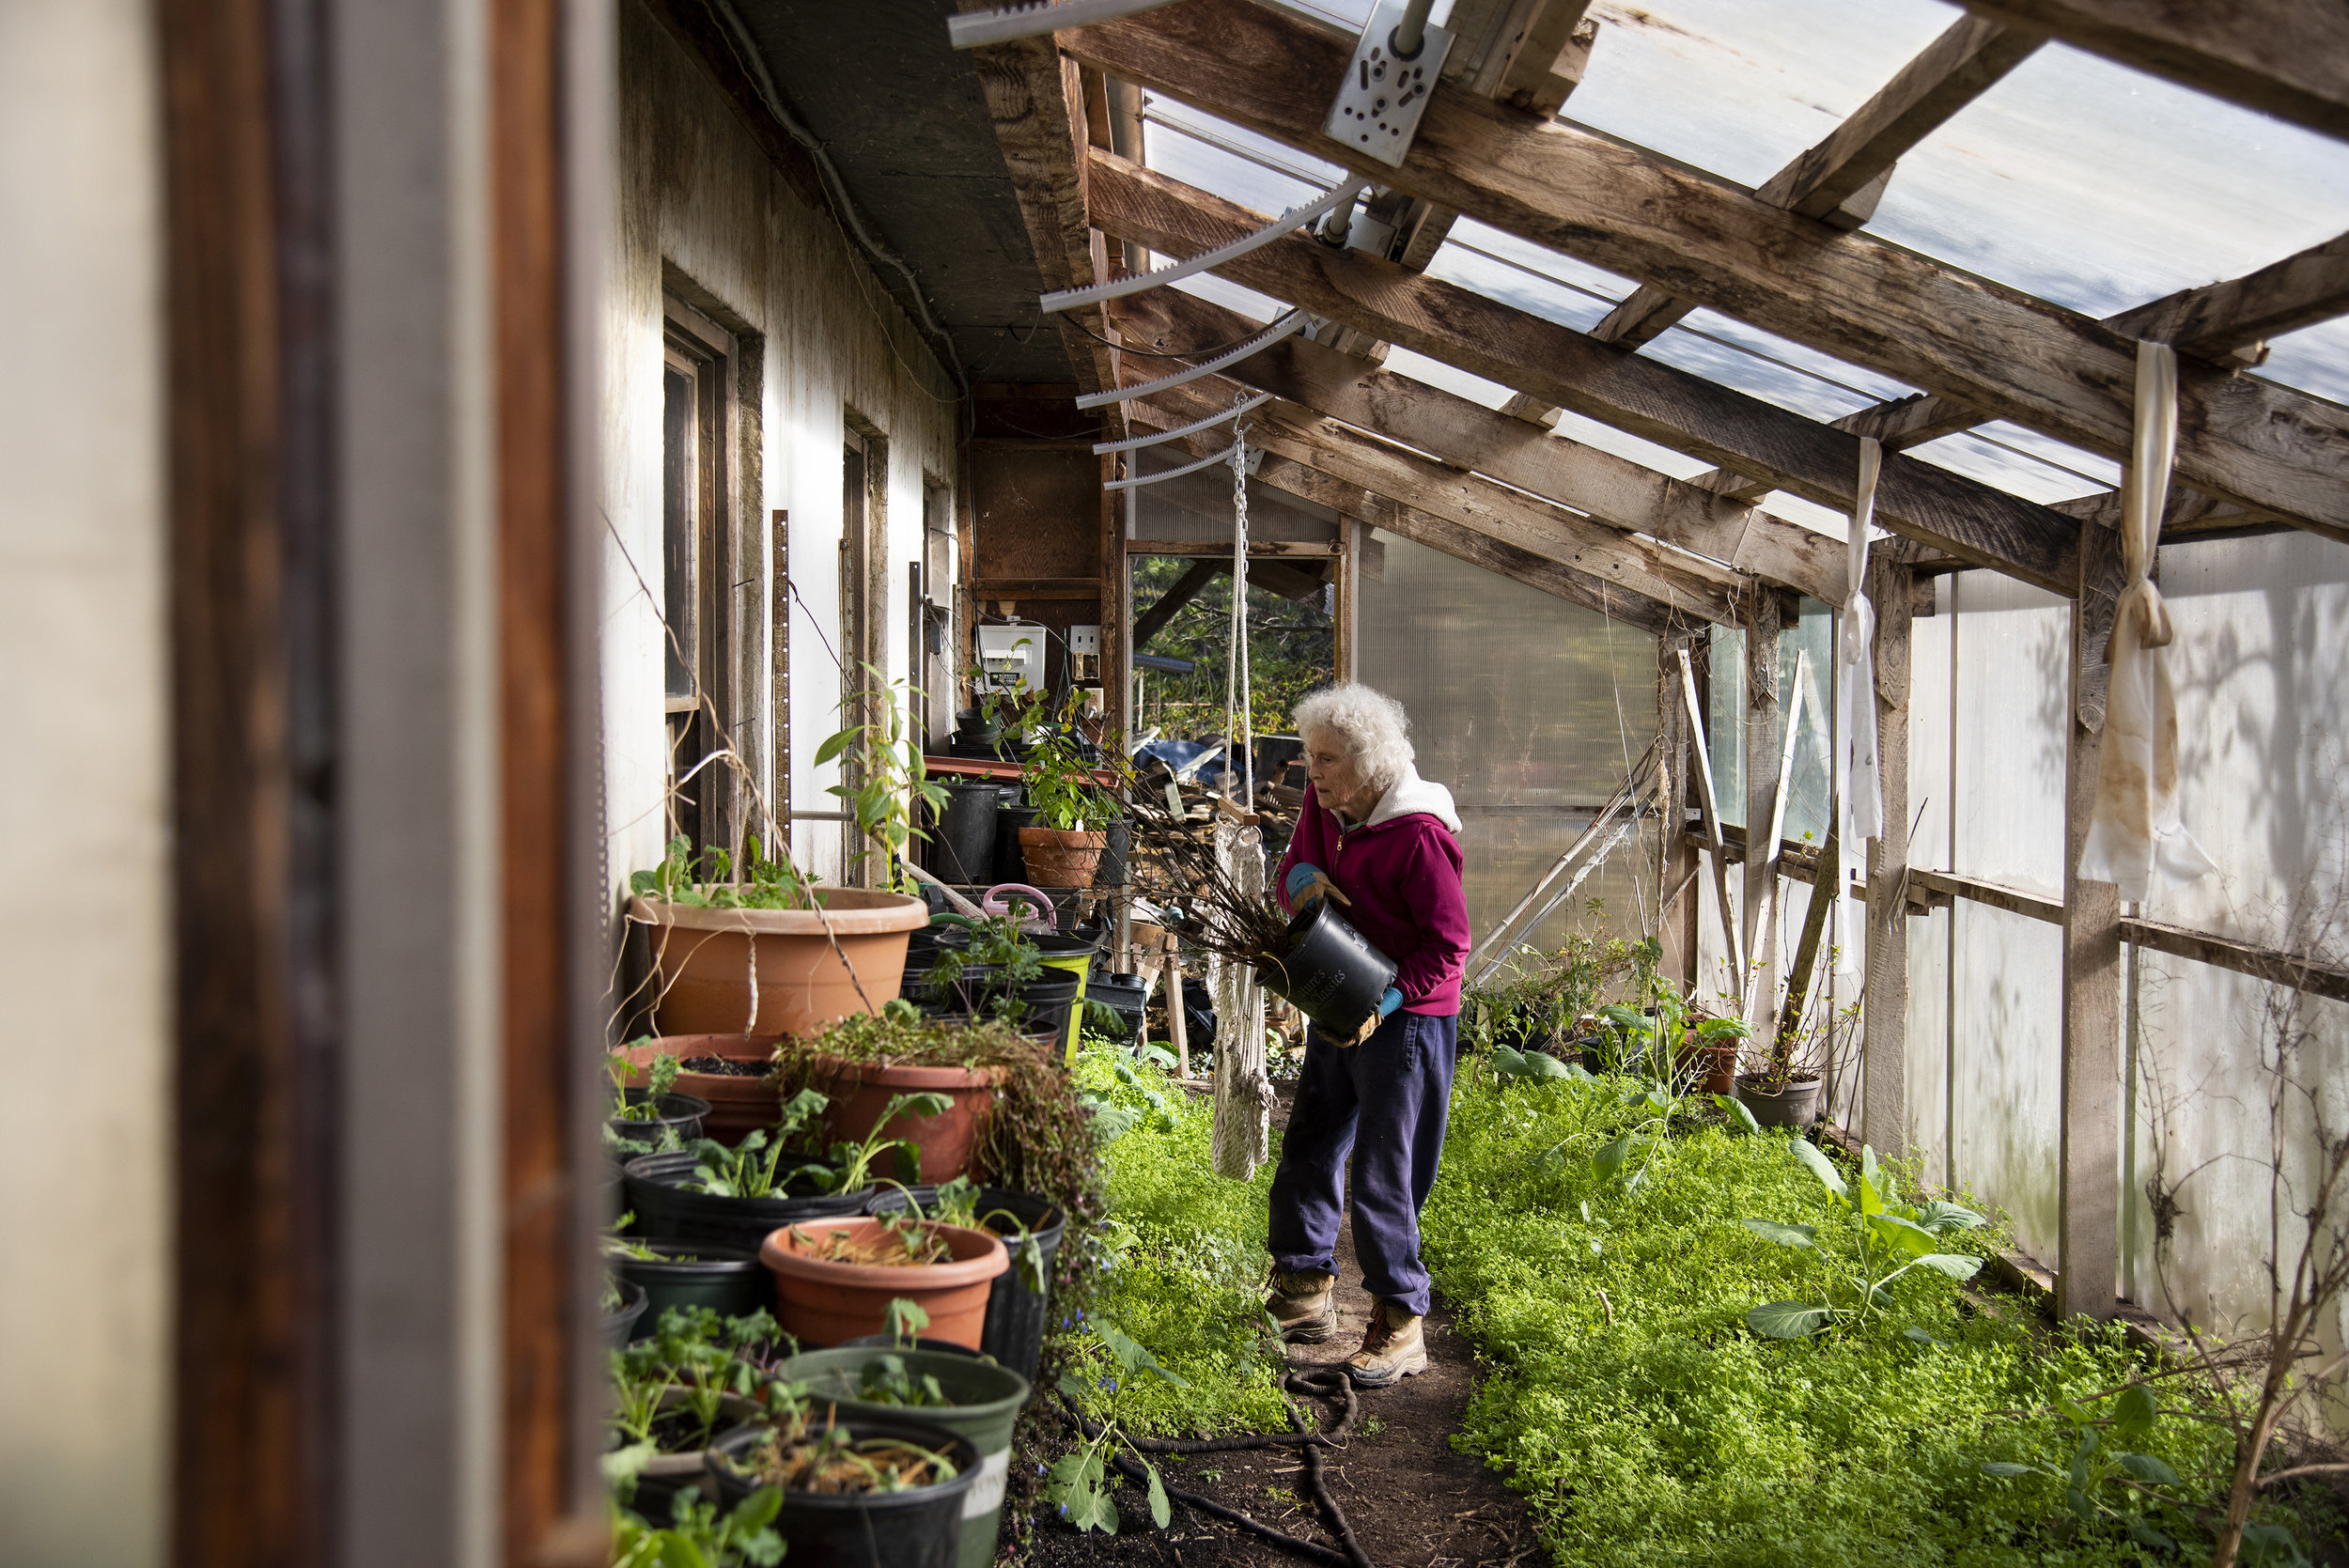  Jean Forsberg moves plants from her outside deck to her personal greenhouse for the winter. Forsberg grows many vegetables, like kale, that she and her husband eat throughout the year. She uses a greenhouse attached to her home opposed to the commun